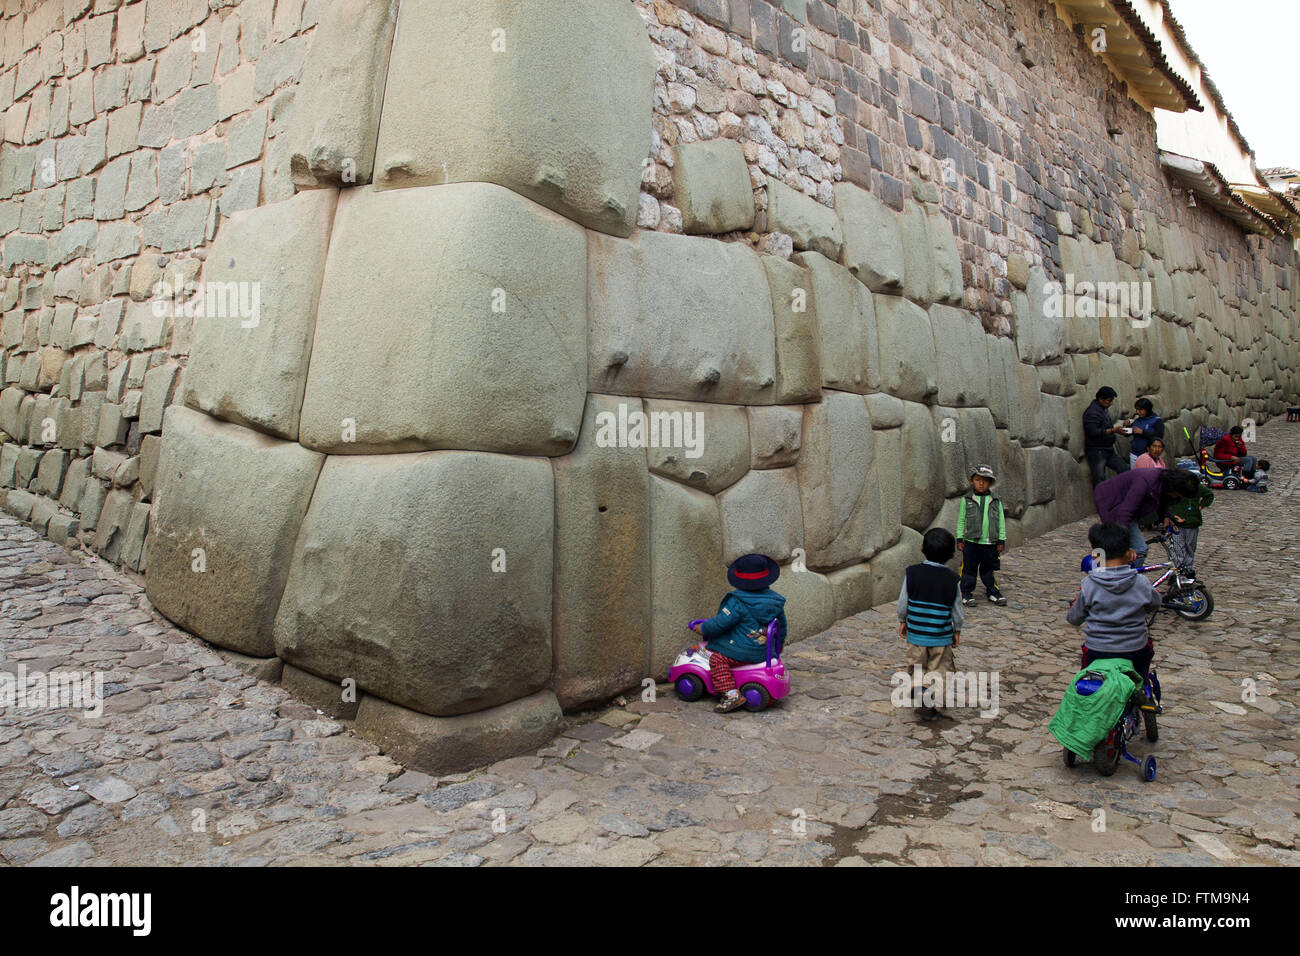 Children in the ruins of the Fortress of Sacsayhuaman - Cusco region of Peru Stock Photo